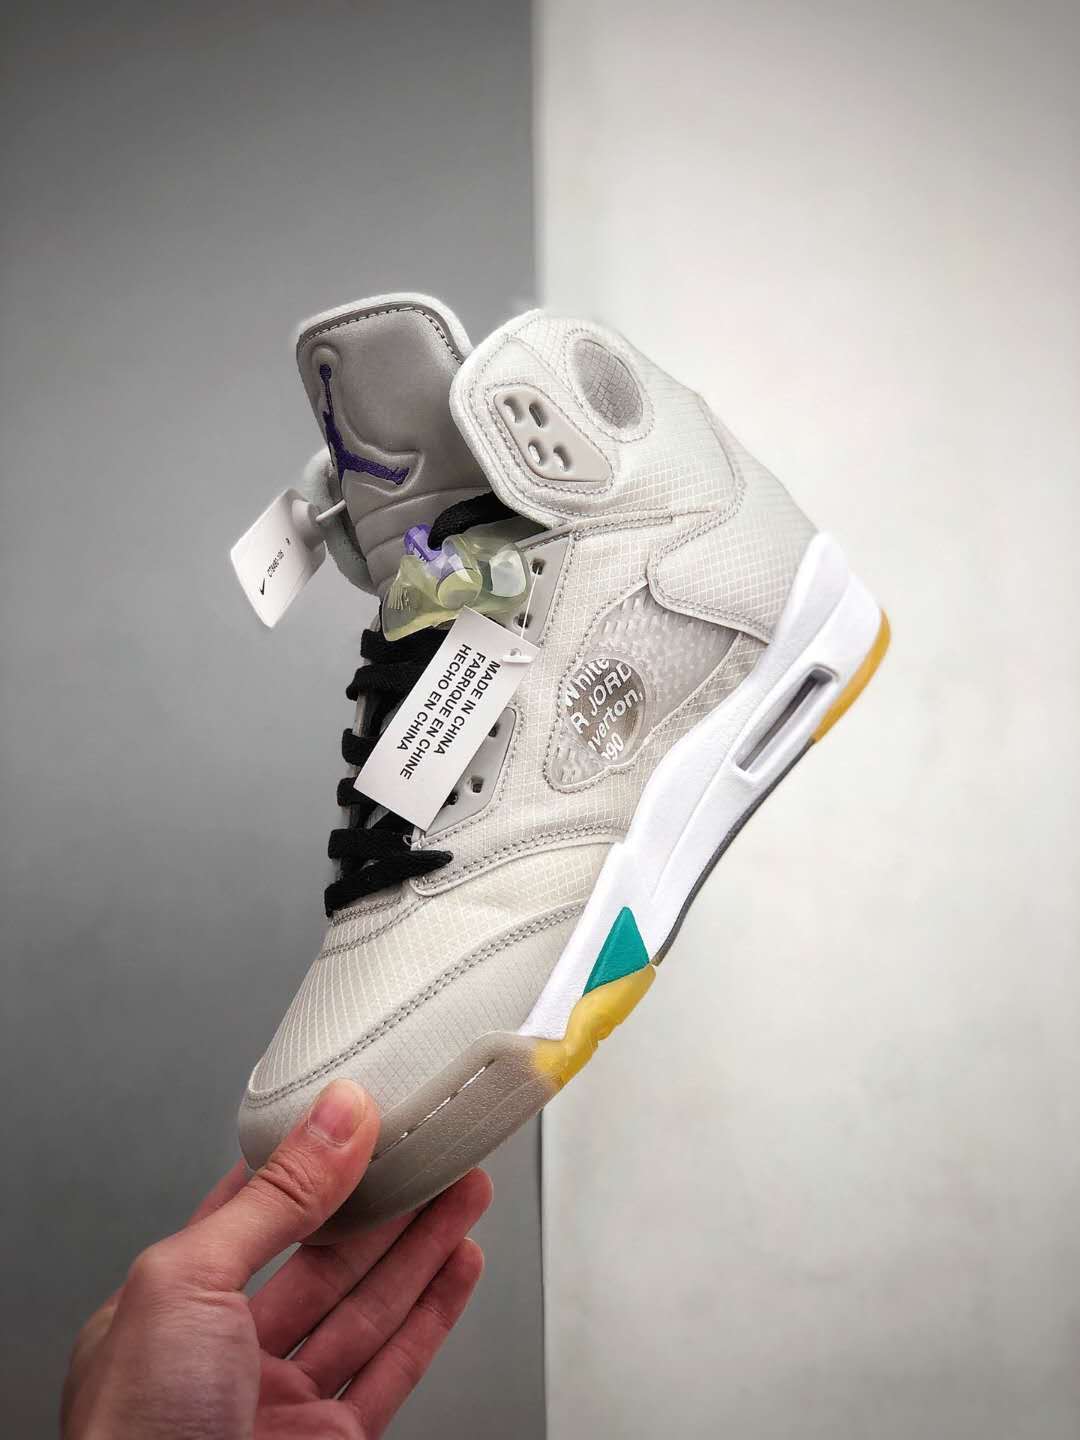 OFF WHITE x Air Jordan 5 Grey Green White CT8480 105 - Limited Edition Collaboration